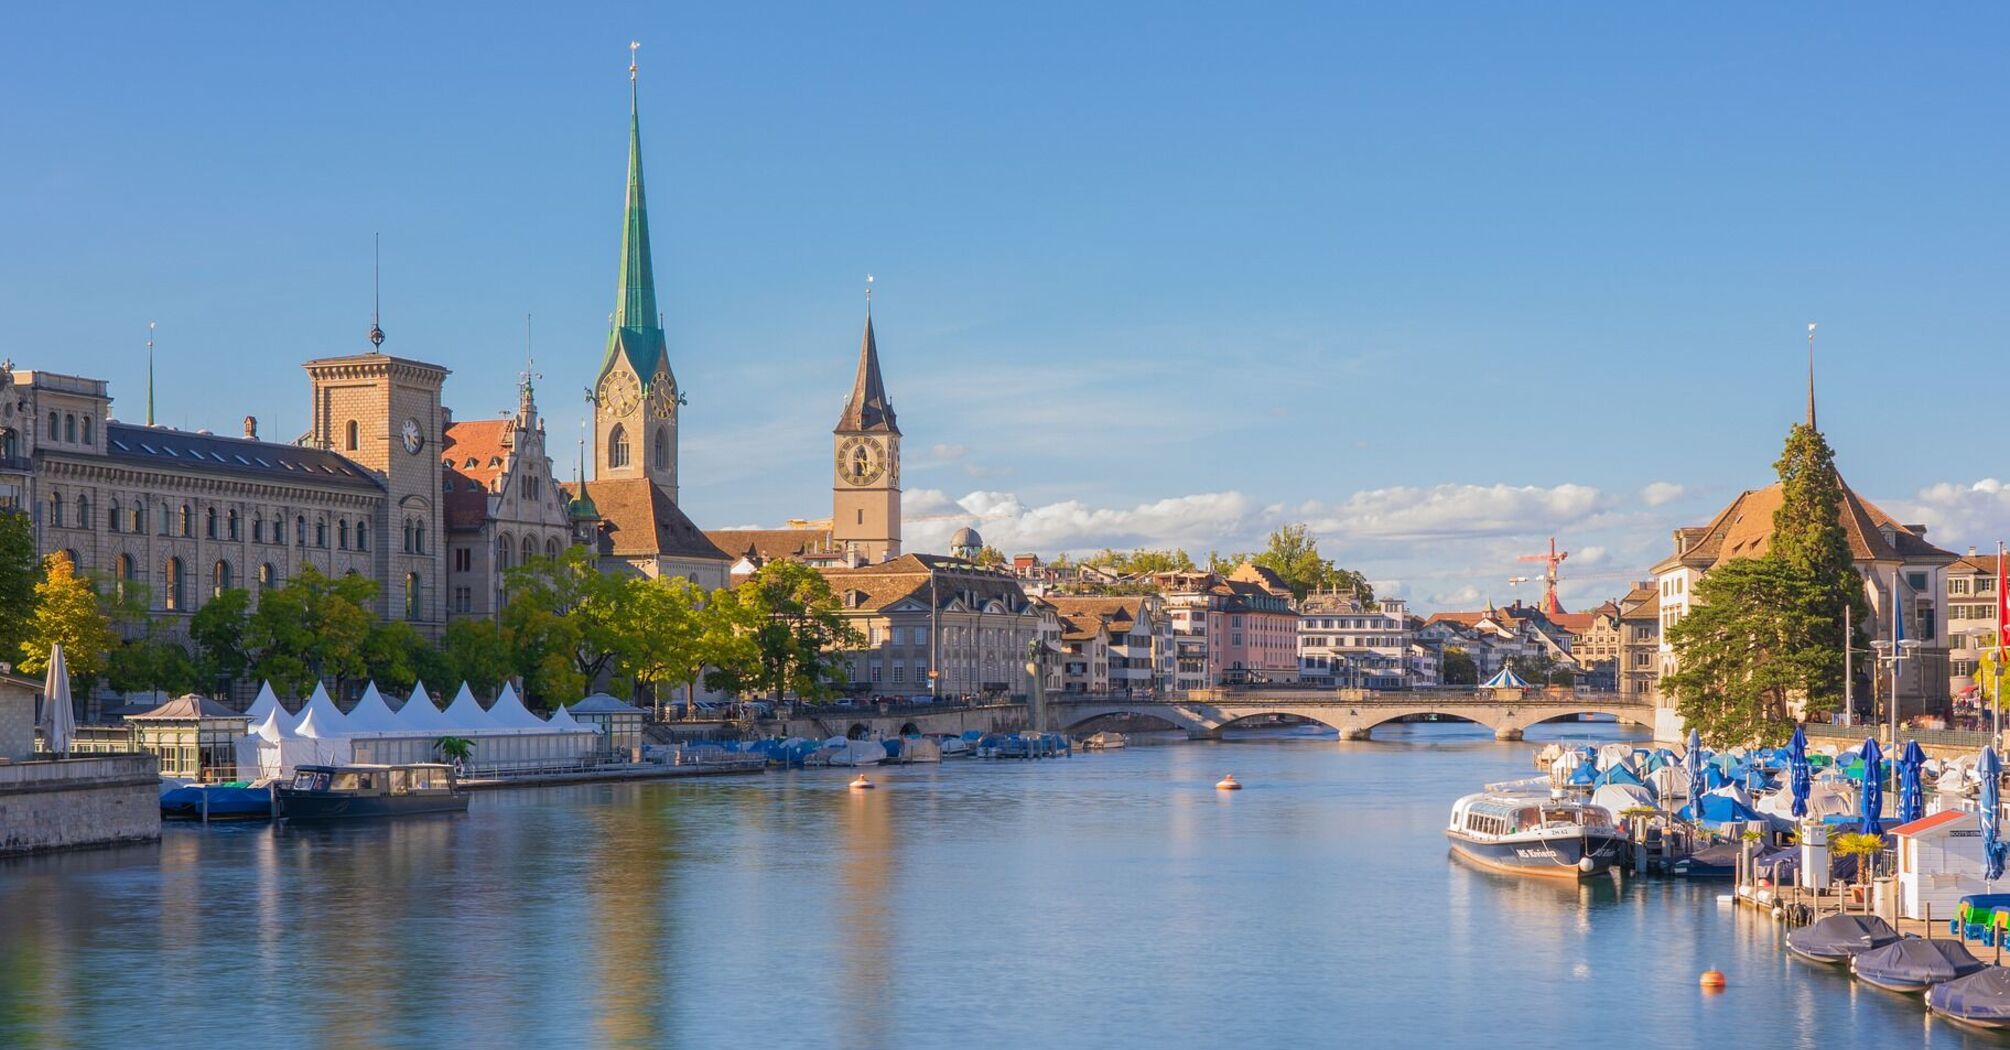 A scenic view of Zurich's historic buildings along the river, with clear blue skies and vibrant greenery